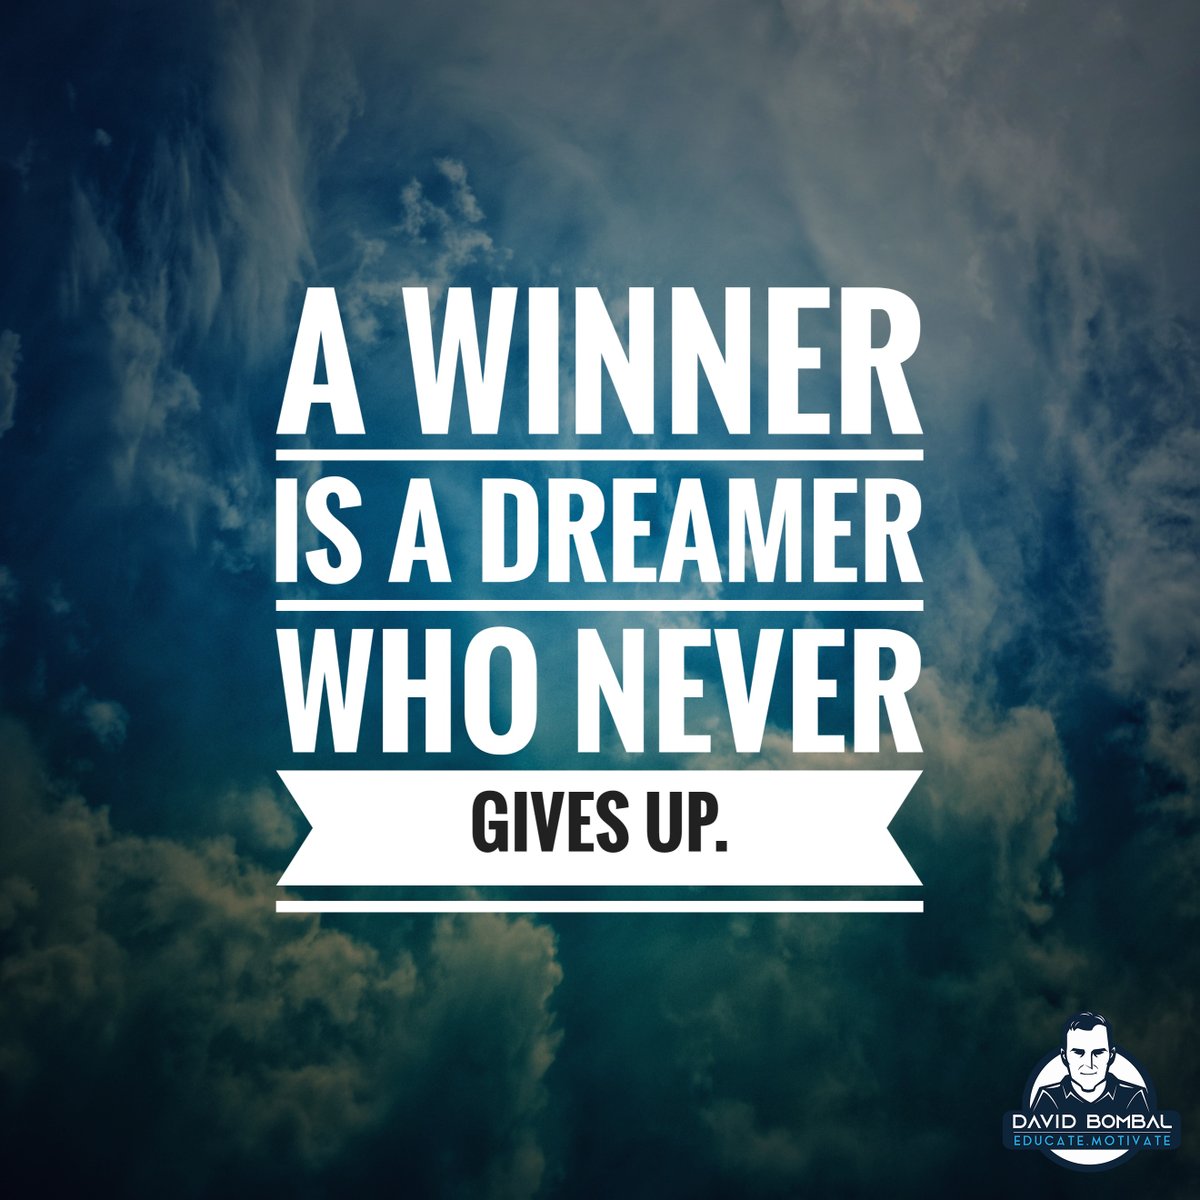 David Bombal winner is a dreamer who never gives up. #motivationquotes #dailymotivation #ccna #inspirationalquote #cisco